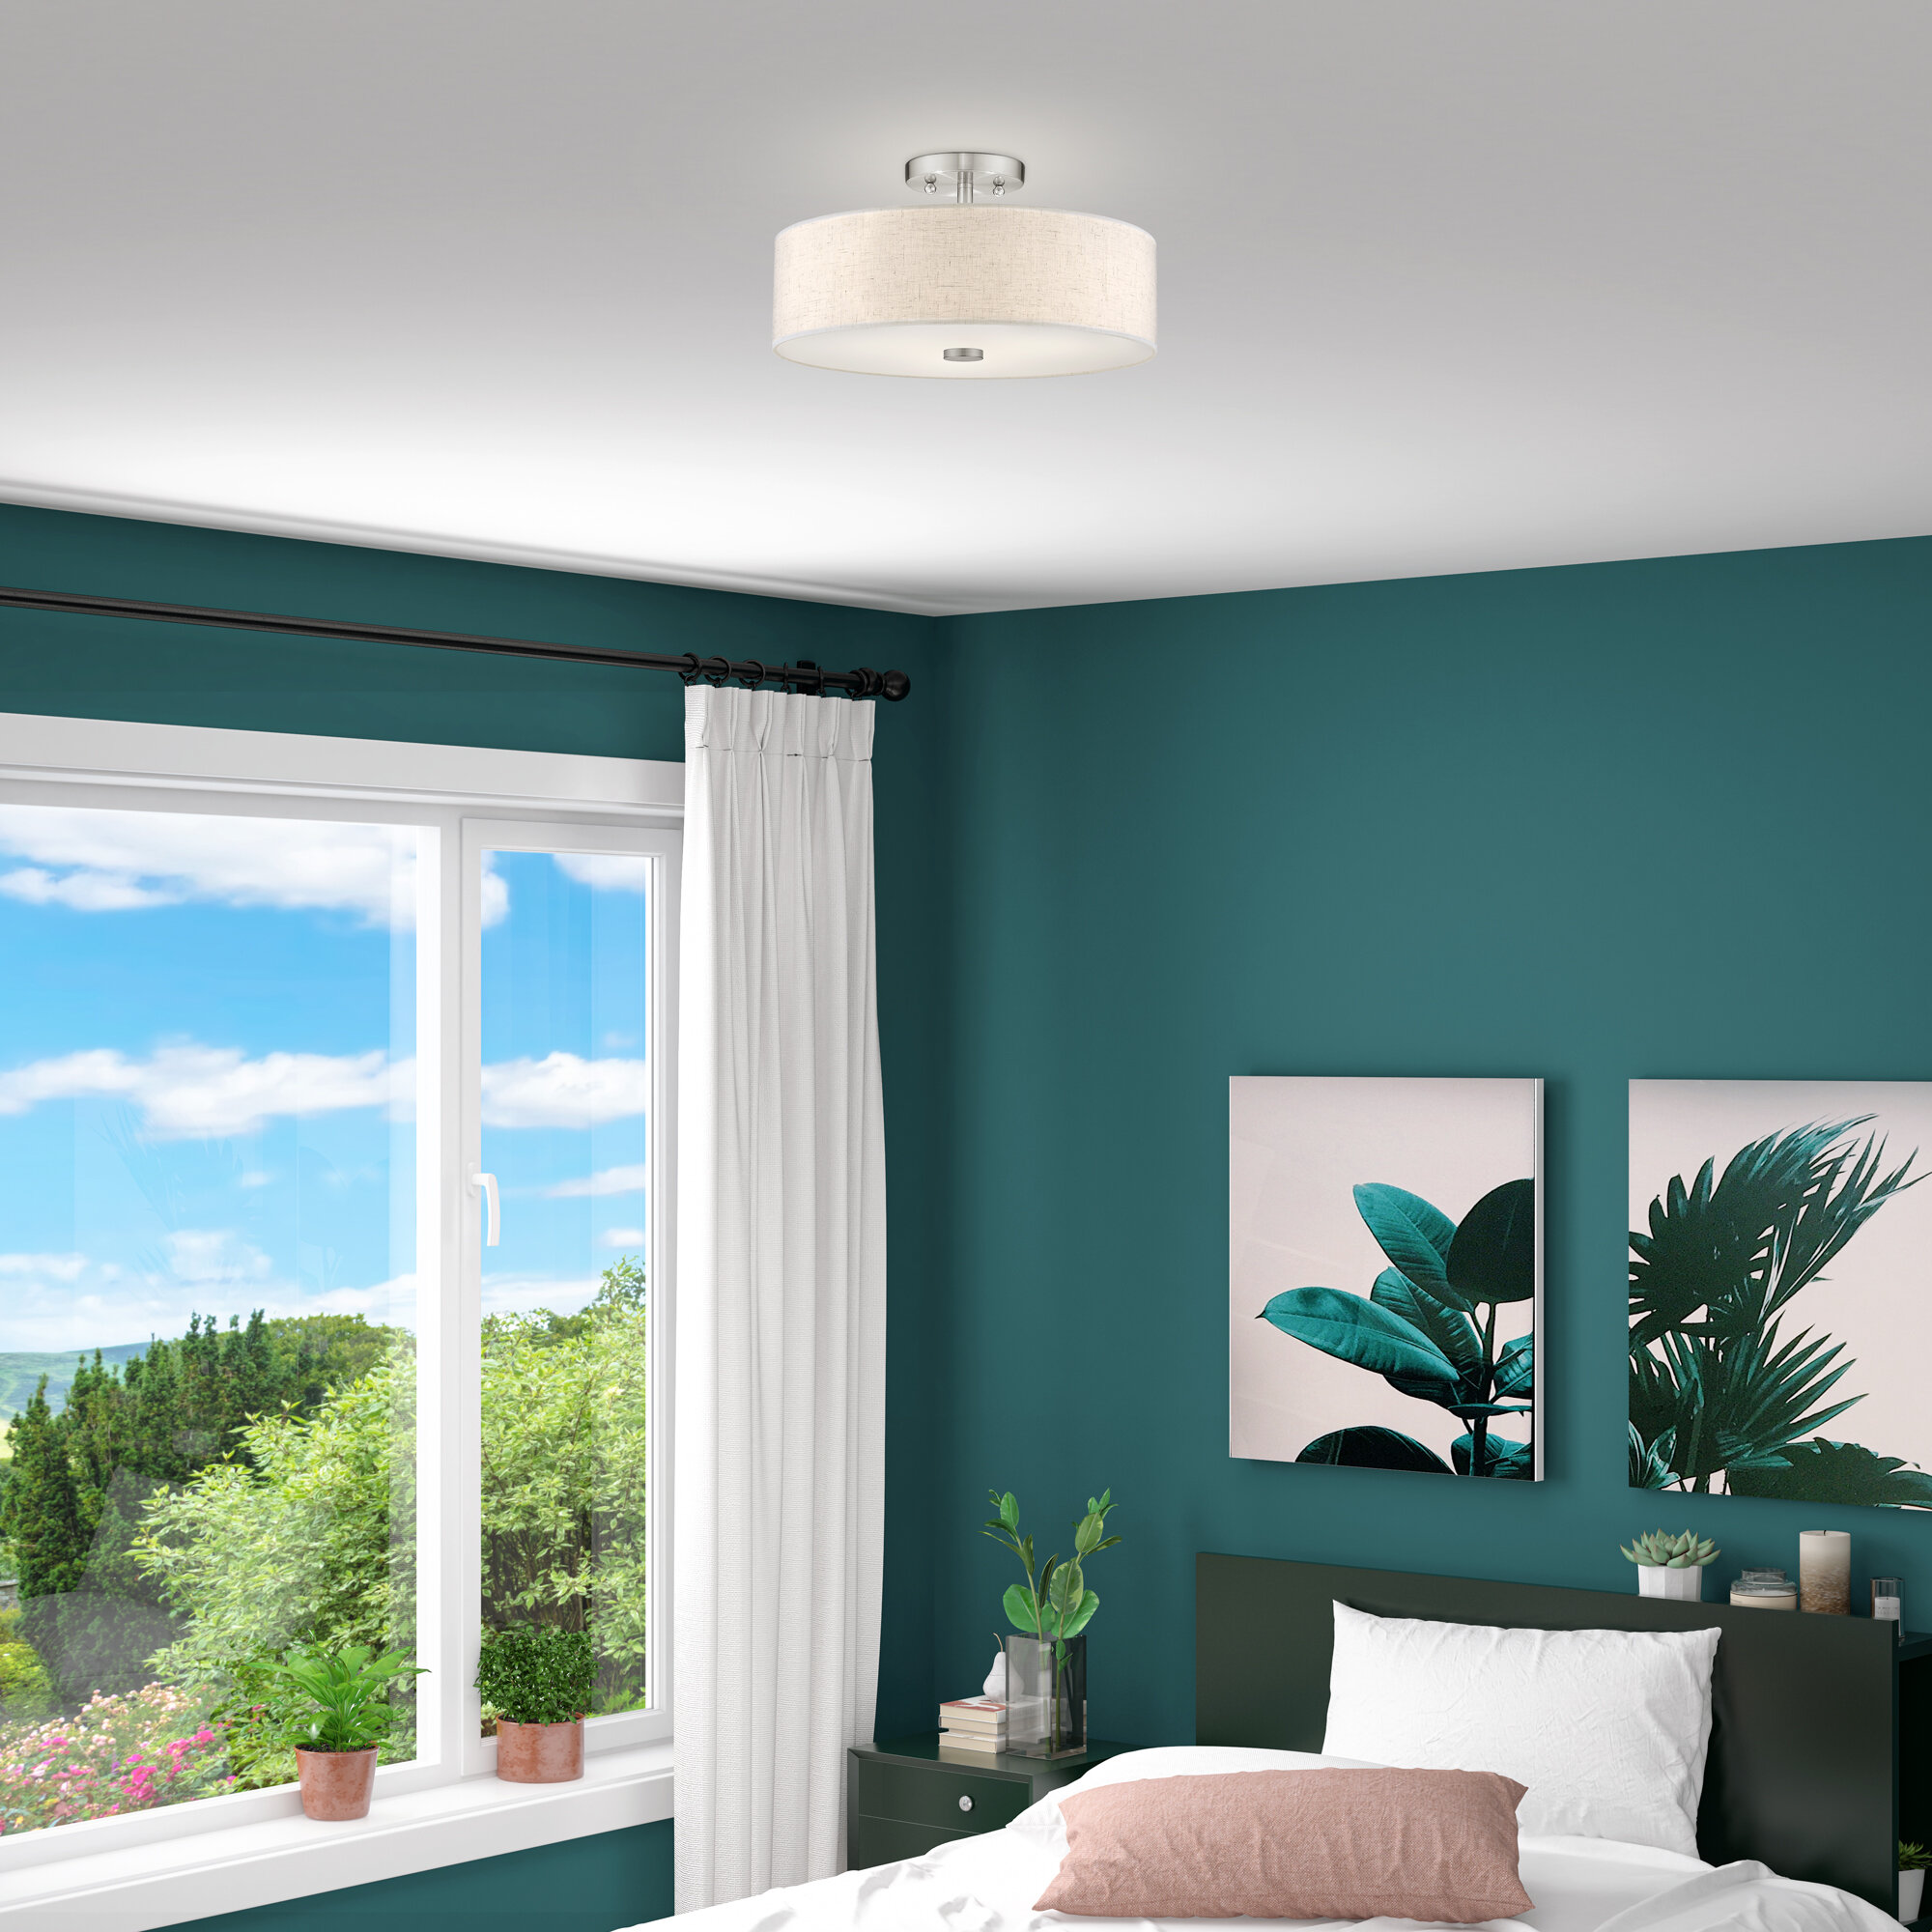 Minimalist Surface Mounted Tri Ceiling Wall Light